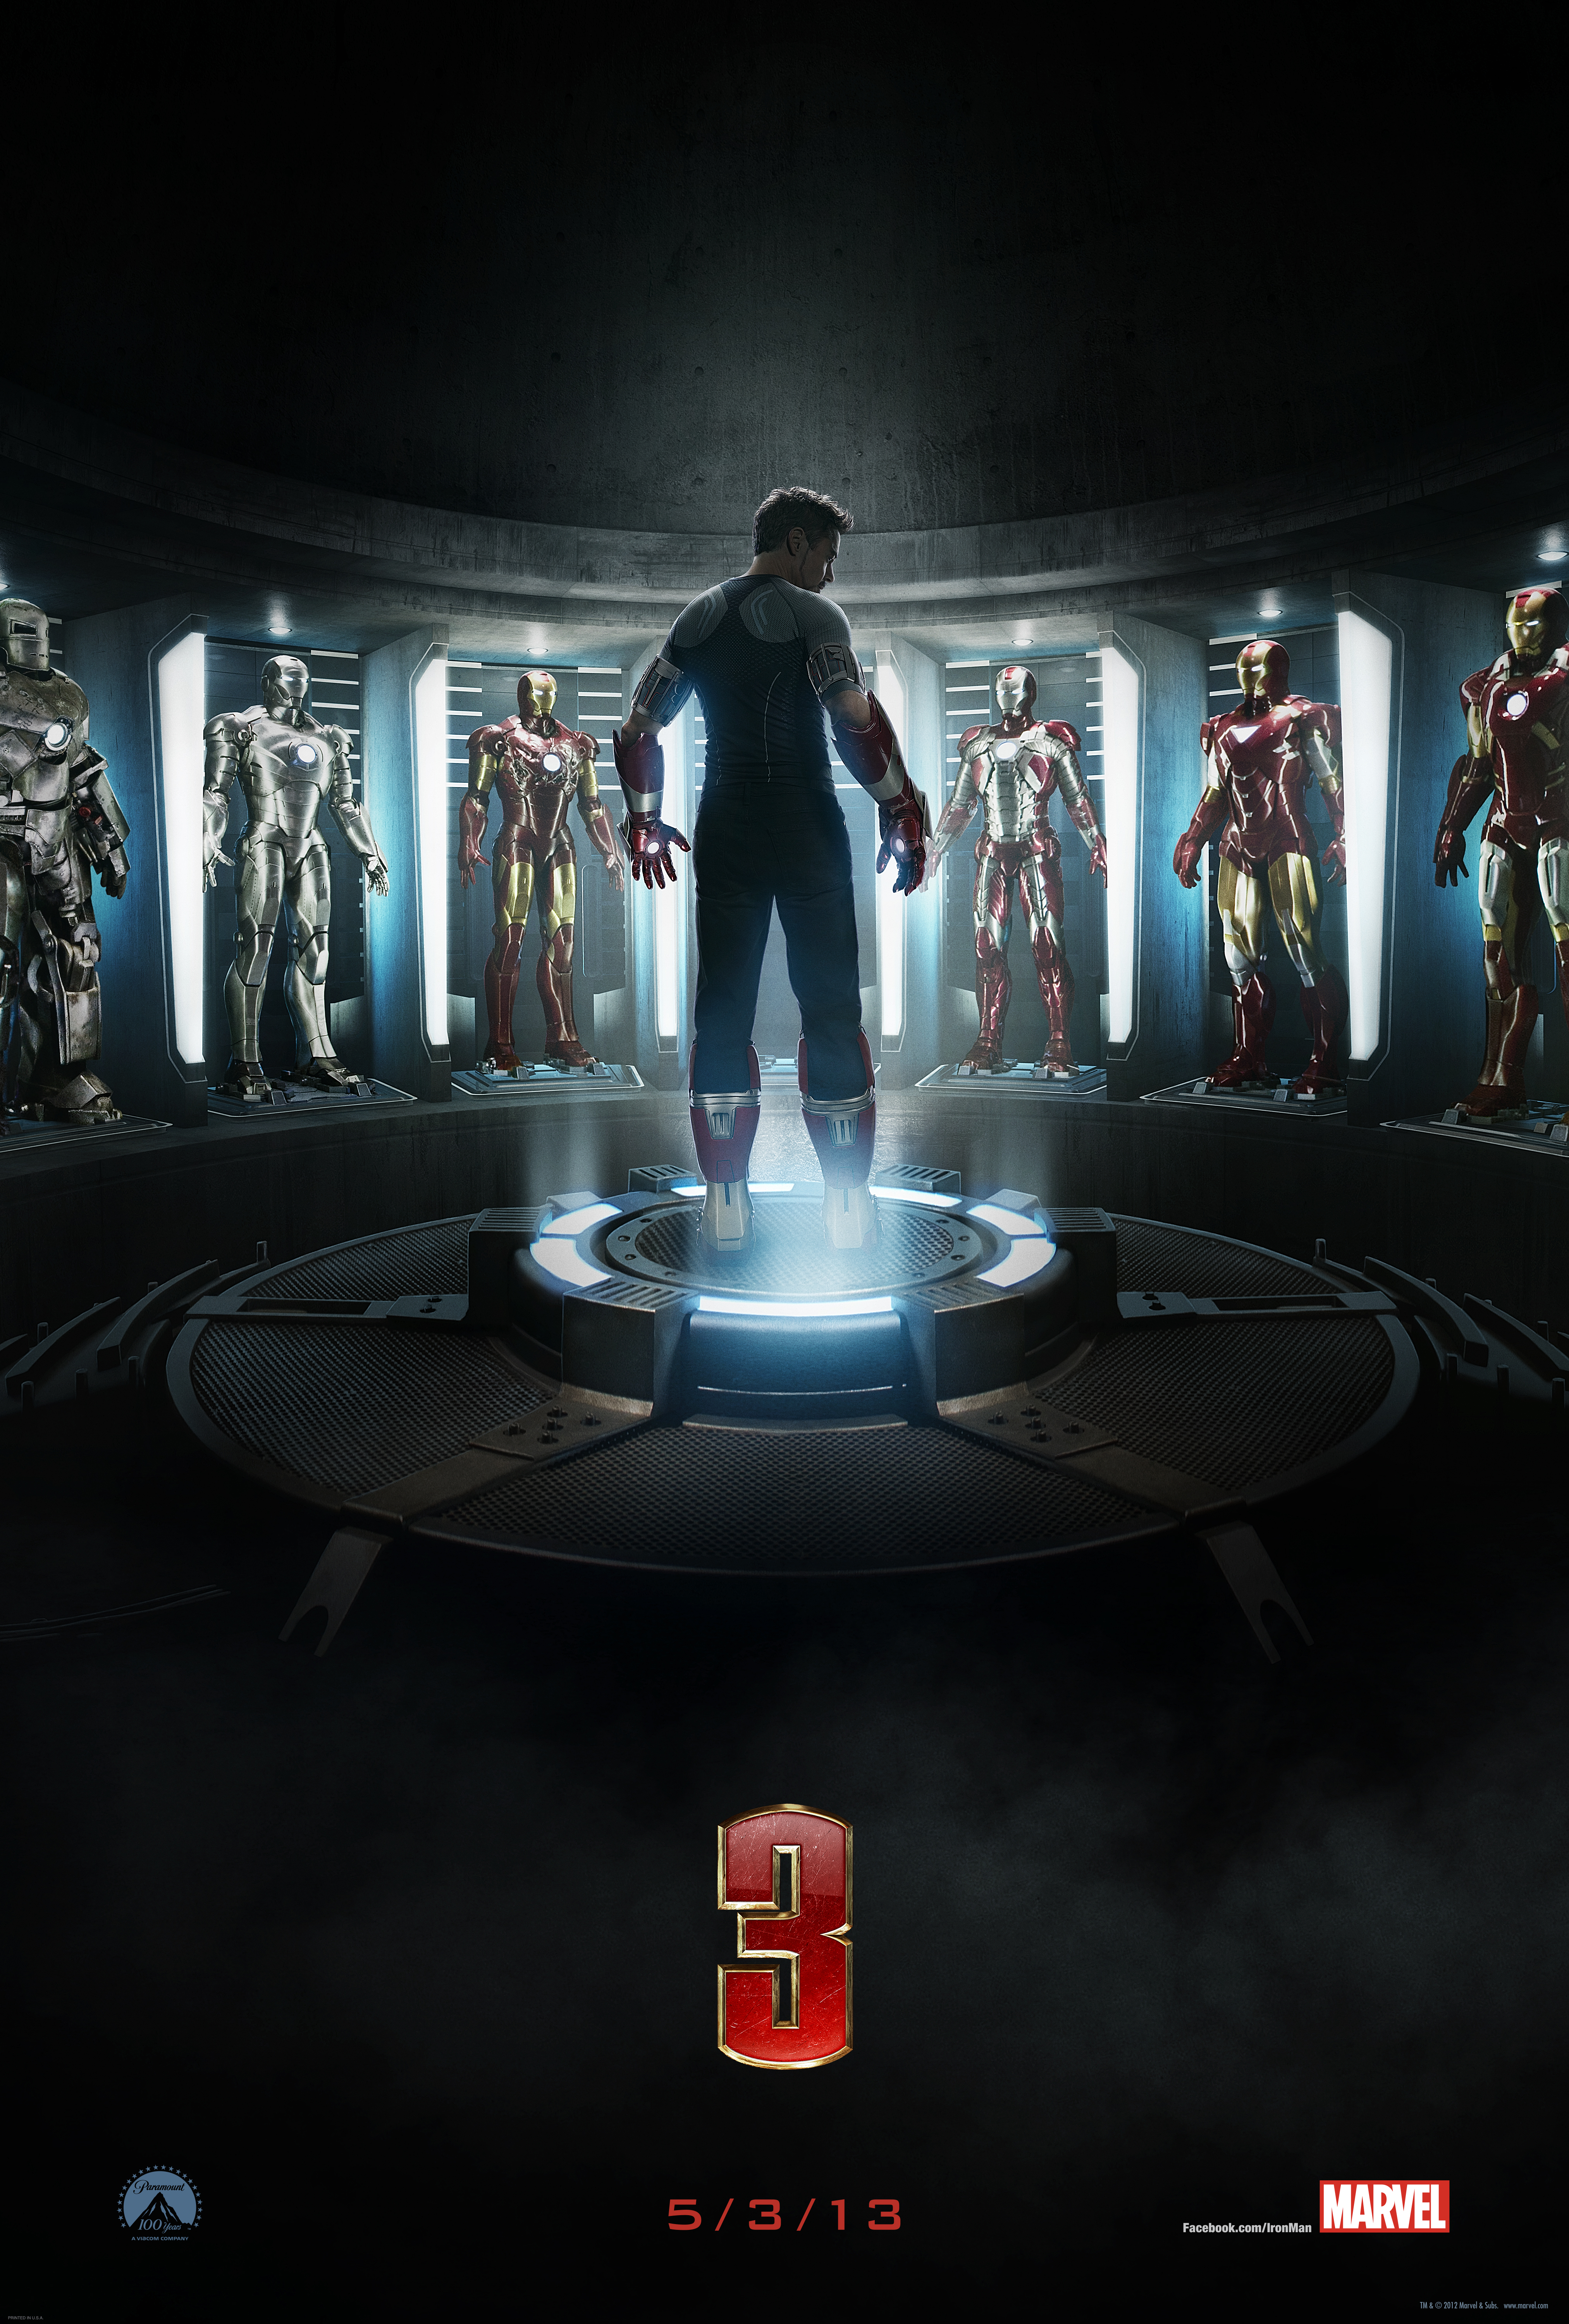 'Iron Man 3' teaser trailer and poster